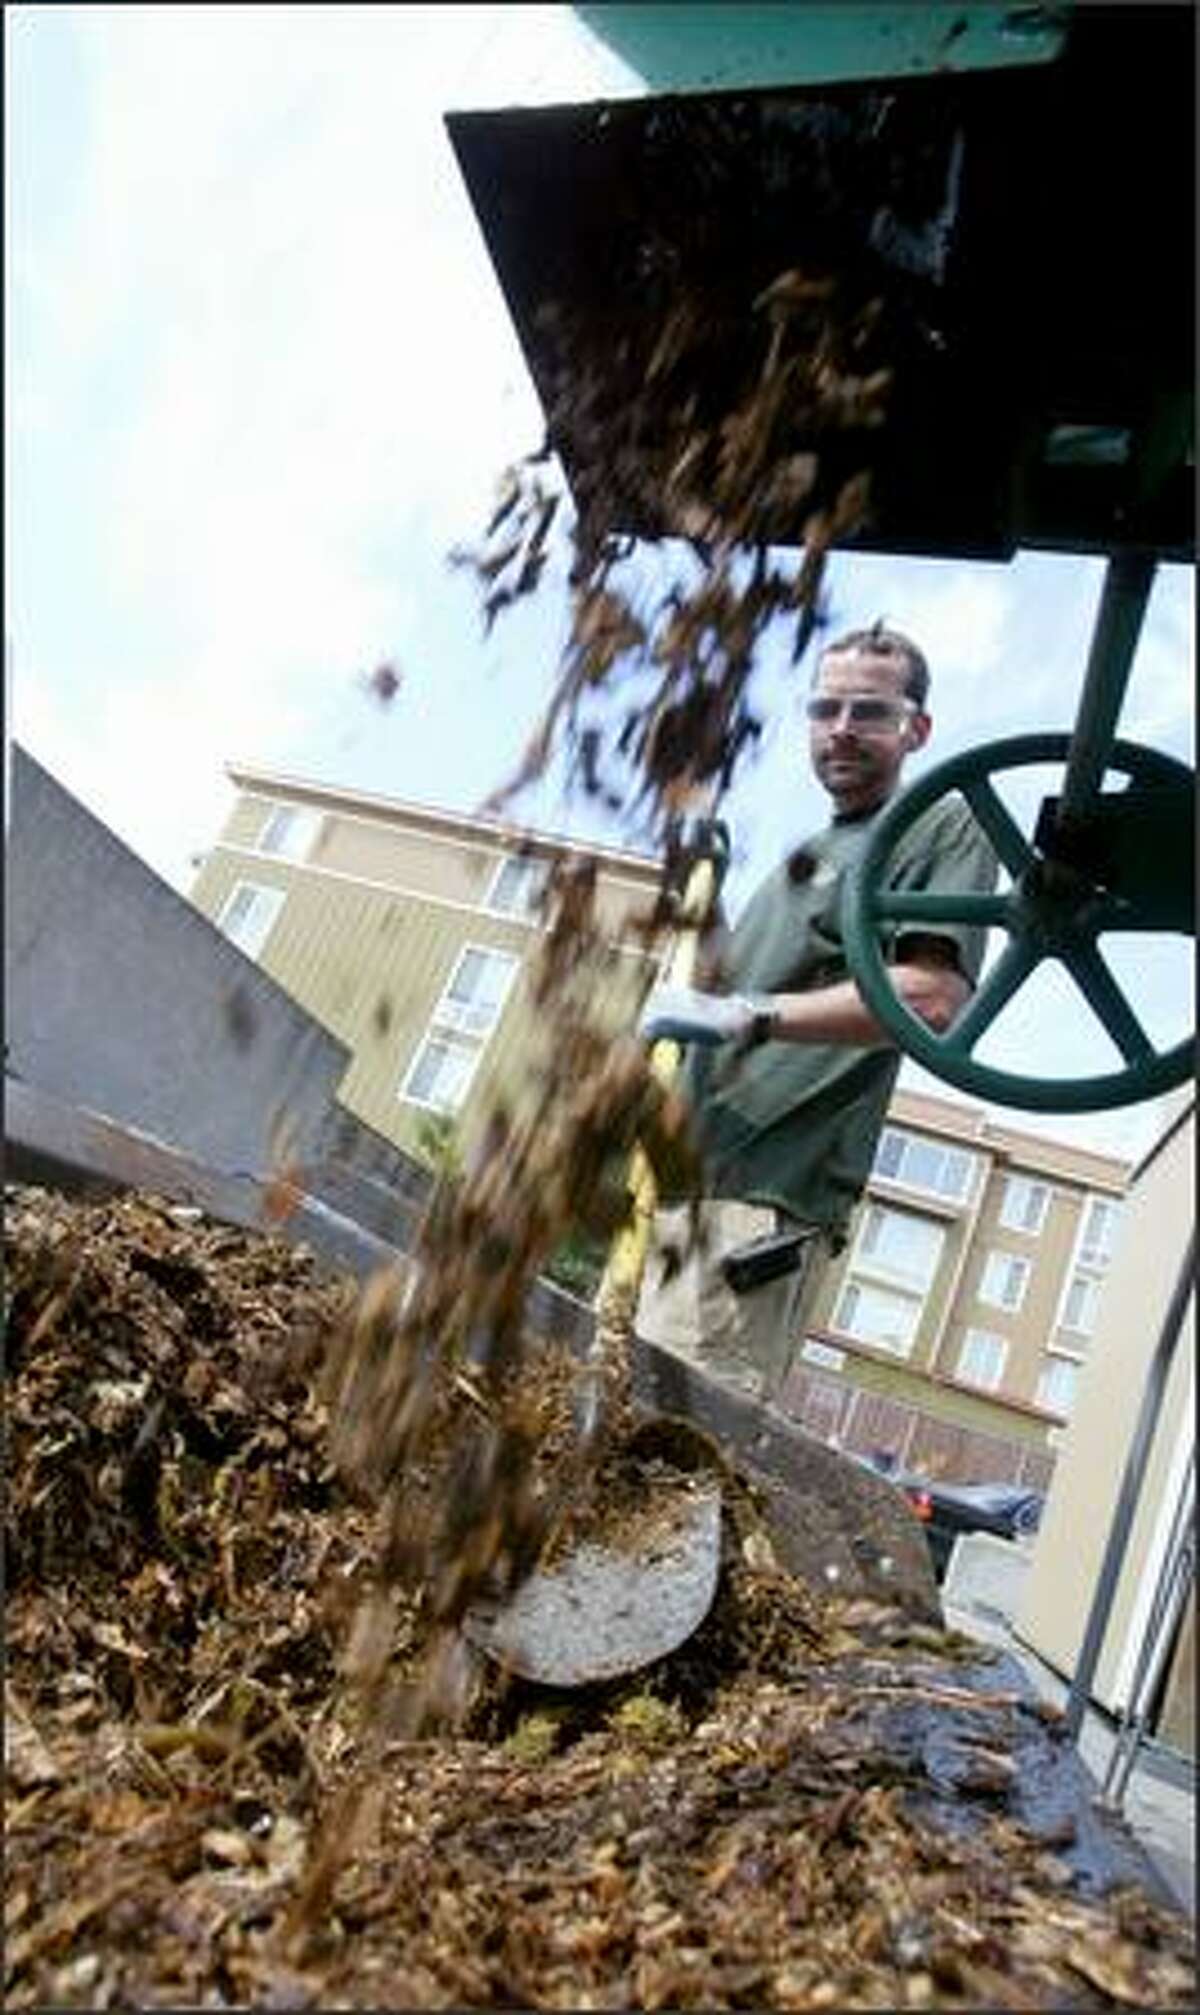 Dierks empties a composted mixture into a front-end loader before using it to fertilize. The school composts leftover produce, breads and coffee grounds.